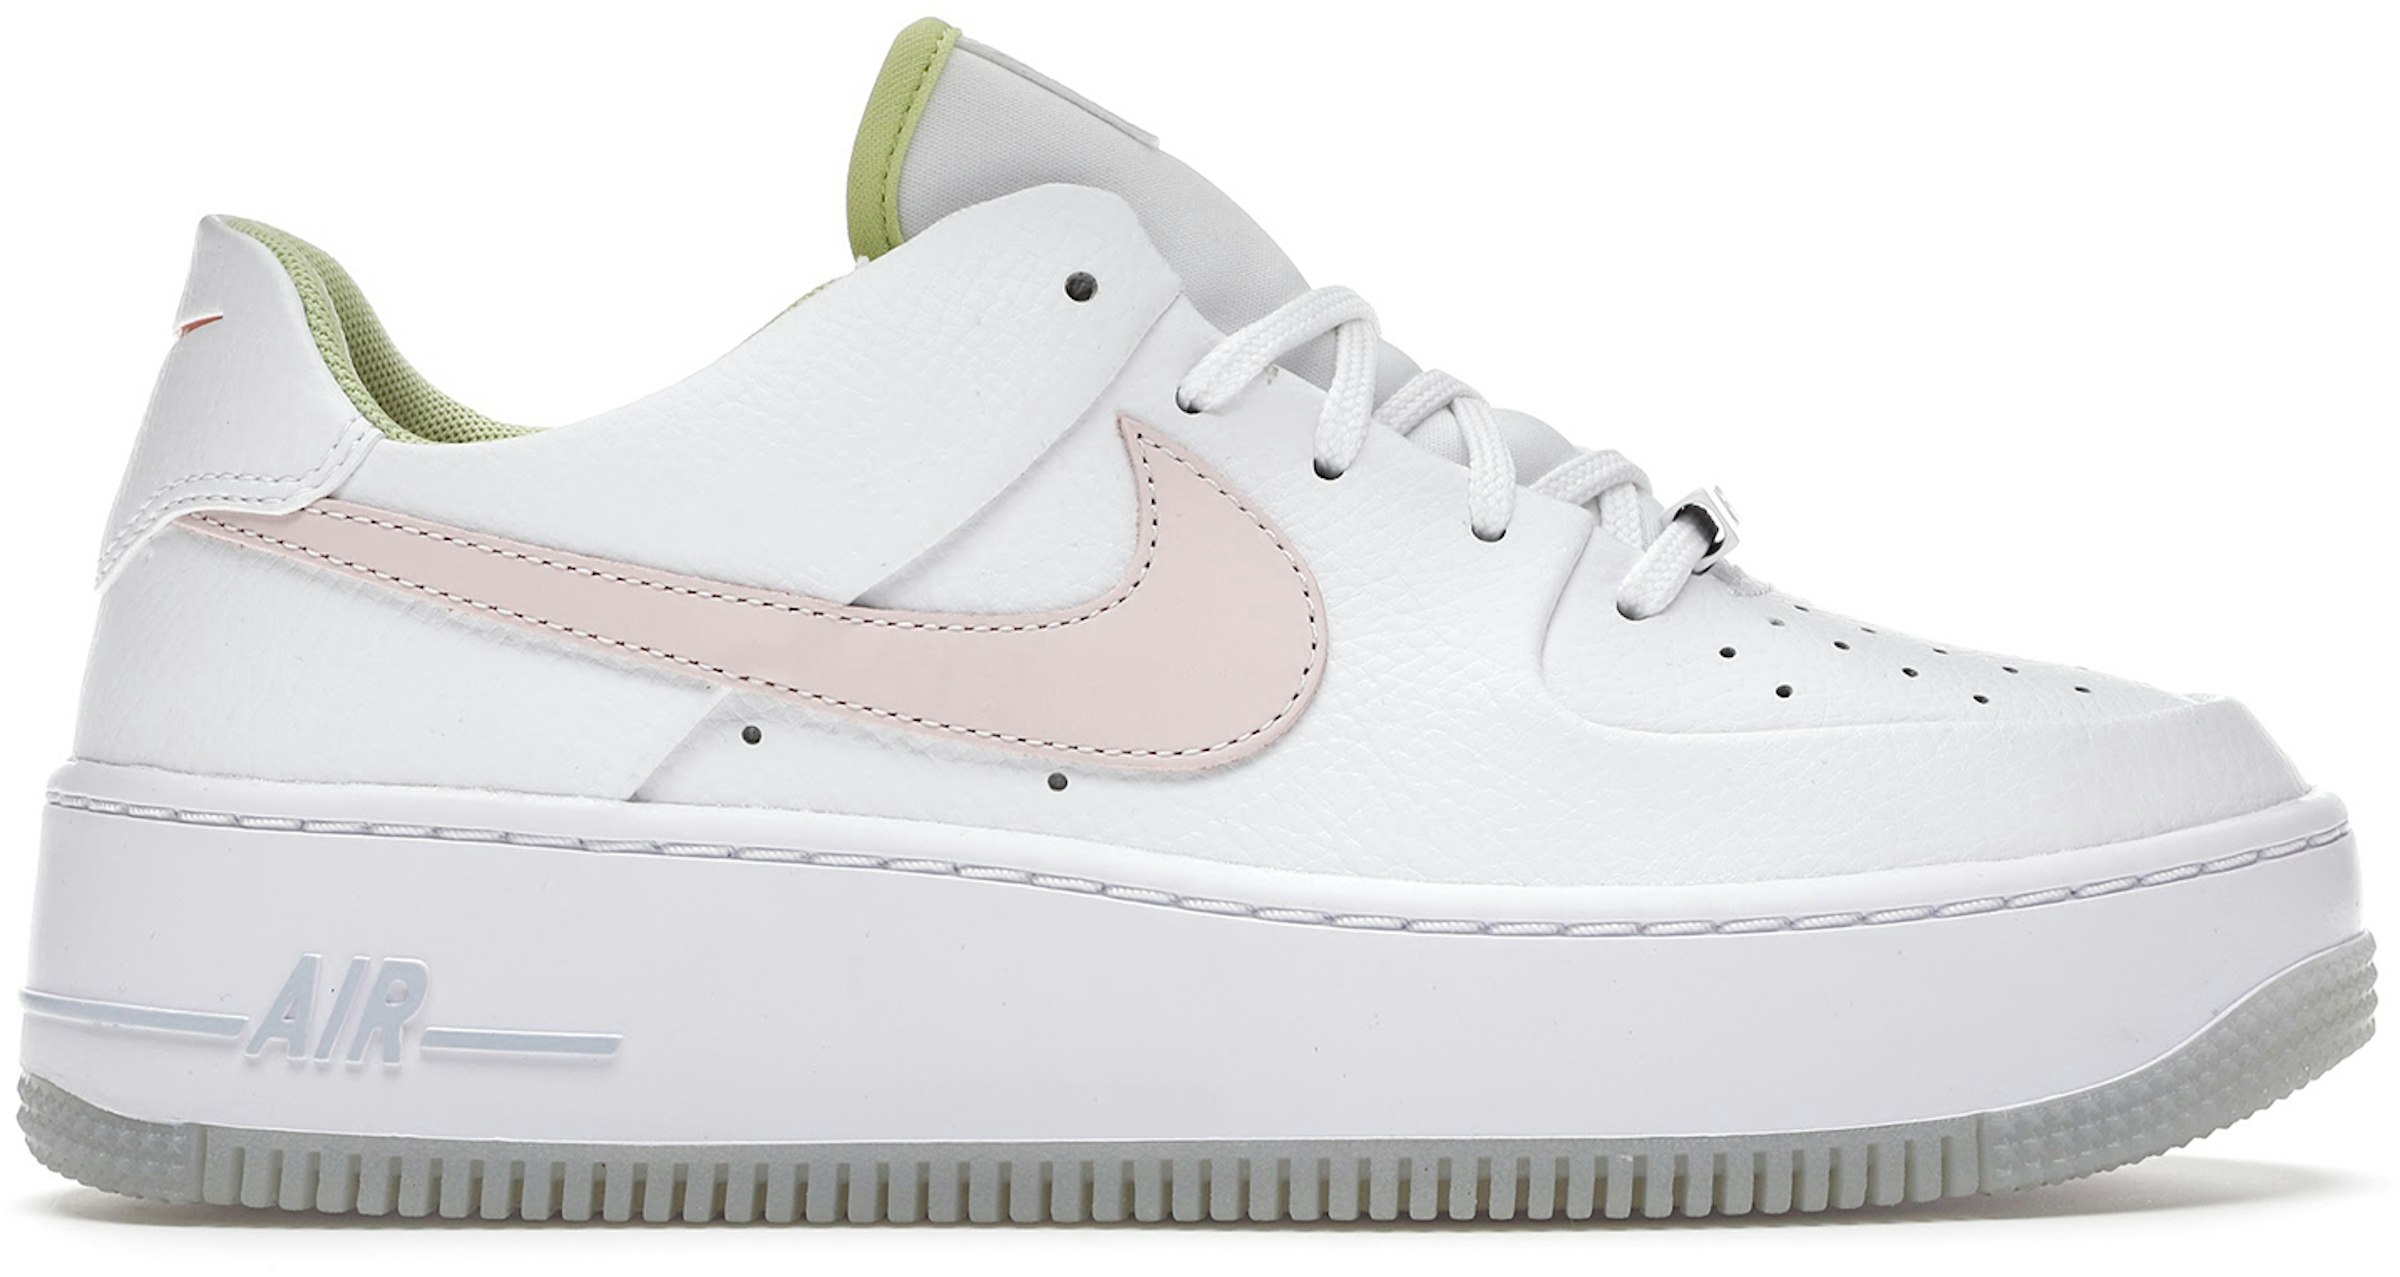 Nike Air Force 1 Low One Of One - CW5566-100 - US